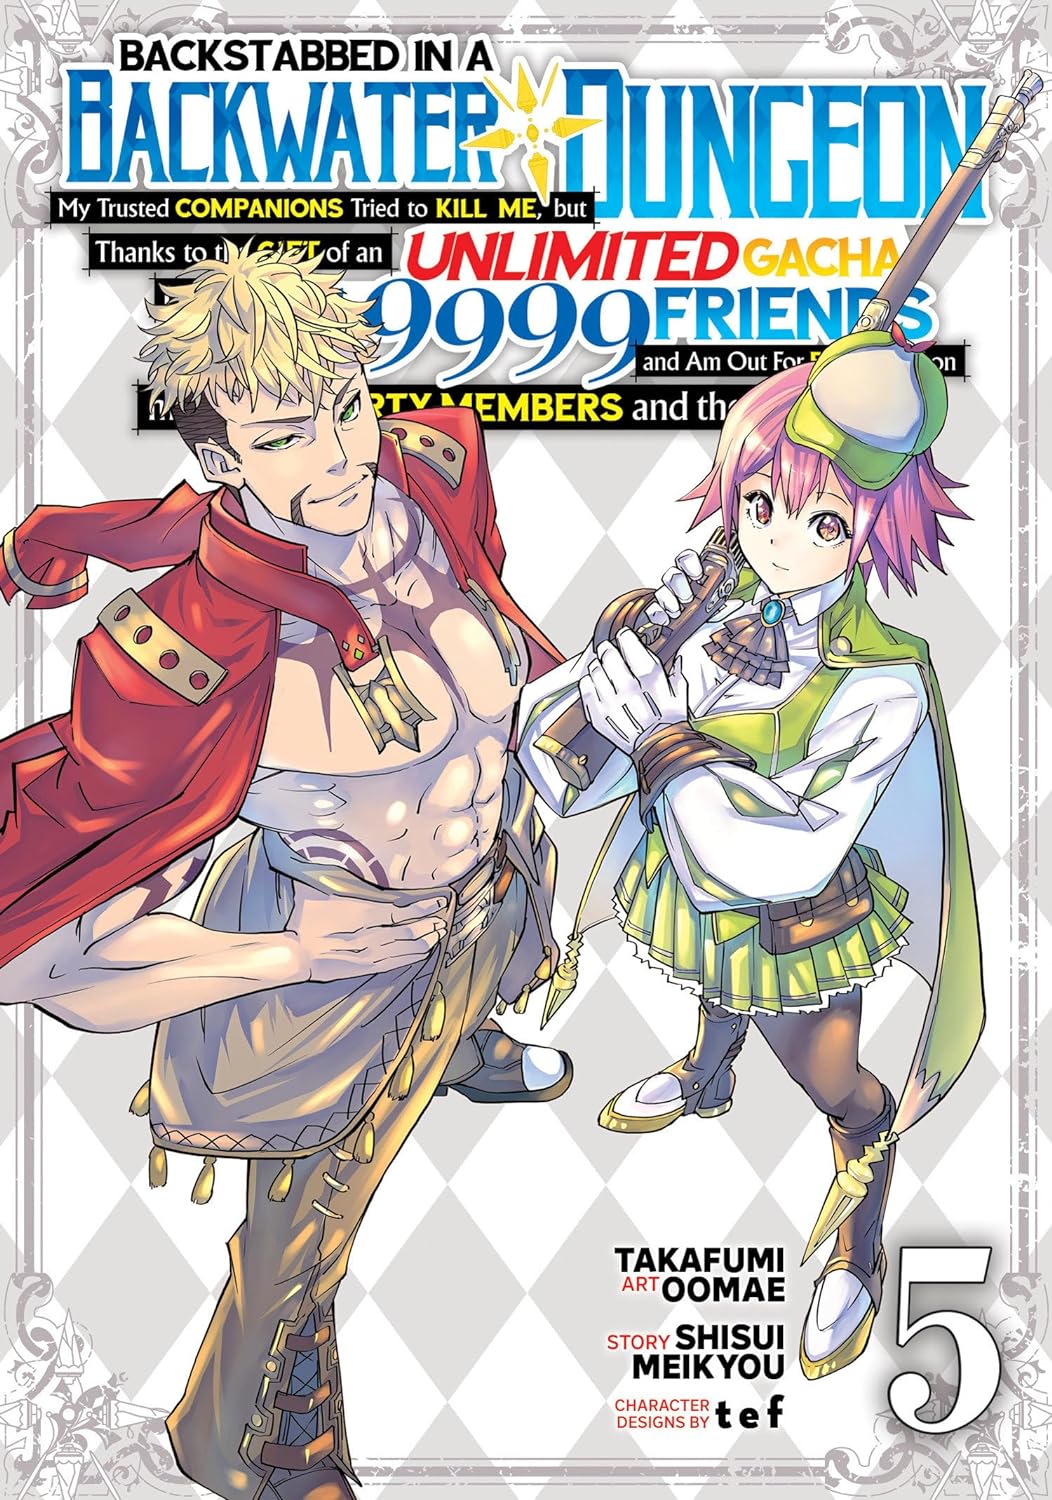 Backstabbed in a Backwater Dungeon: My Trusted Companions Tried to Kill Me, But Thanks to the Gift of an Unlimited Gacha I Got LVL 9999 Friends and Am Out For Revenge on my Former Party Members and the World (Manga) Vol. 05